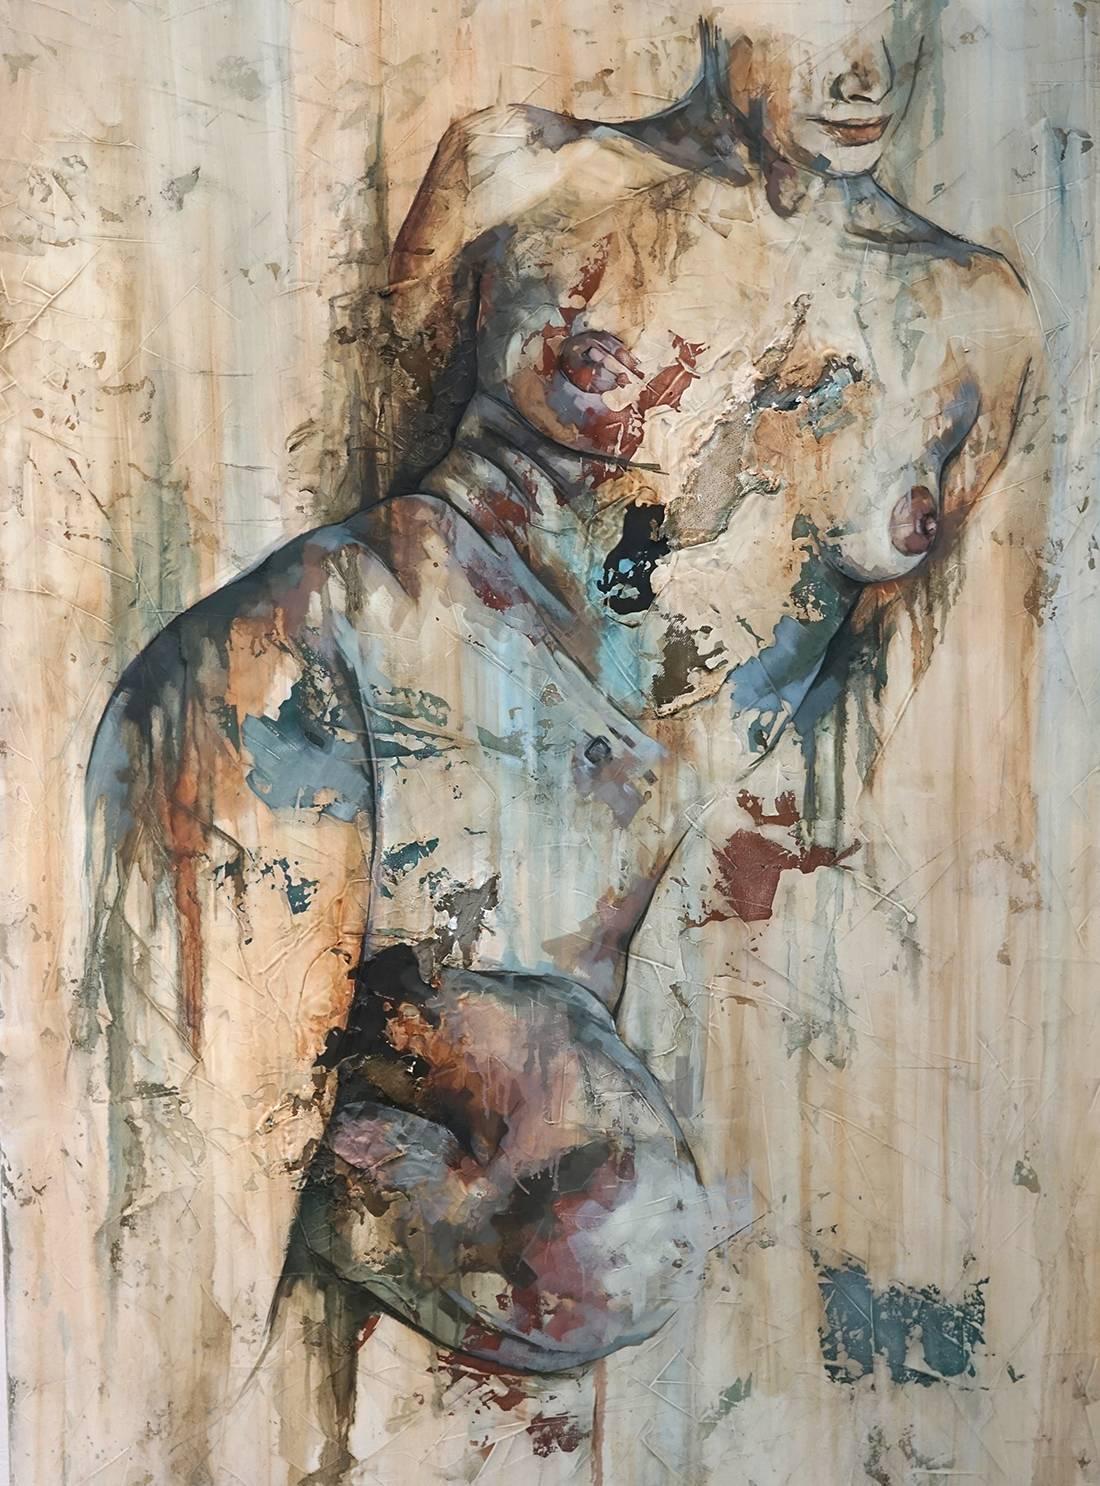 Traces by Francisco Jimenez - Modern, Abstract Painting of Nude Figurative Woman